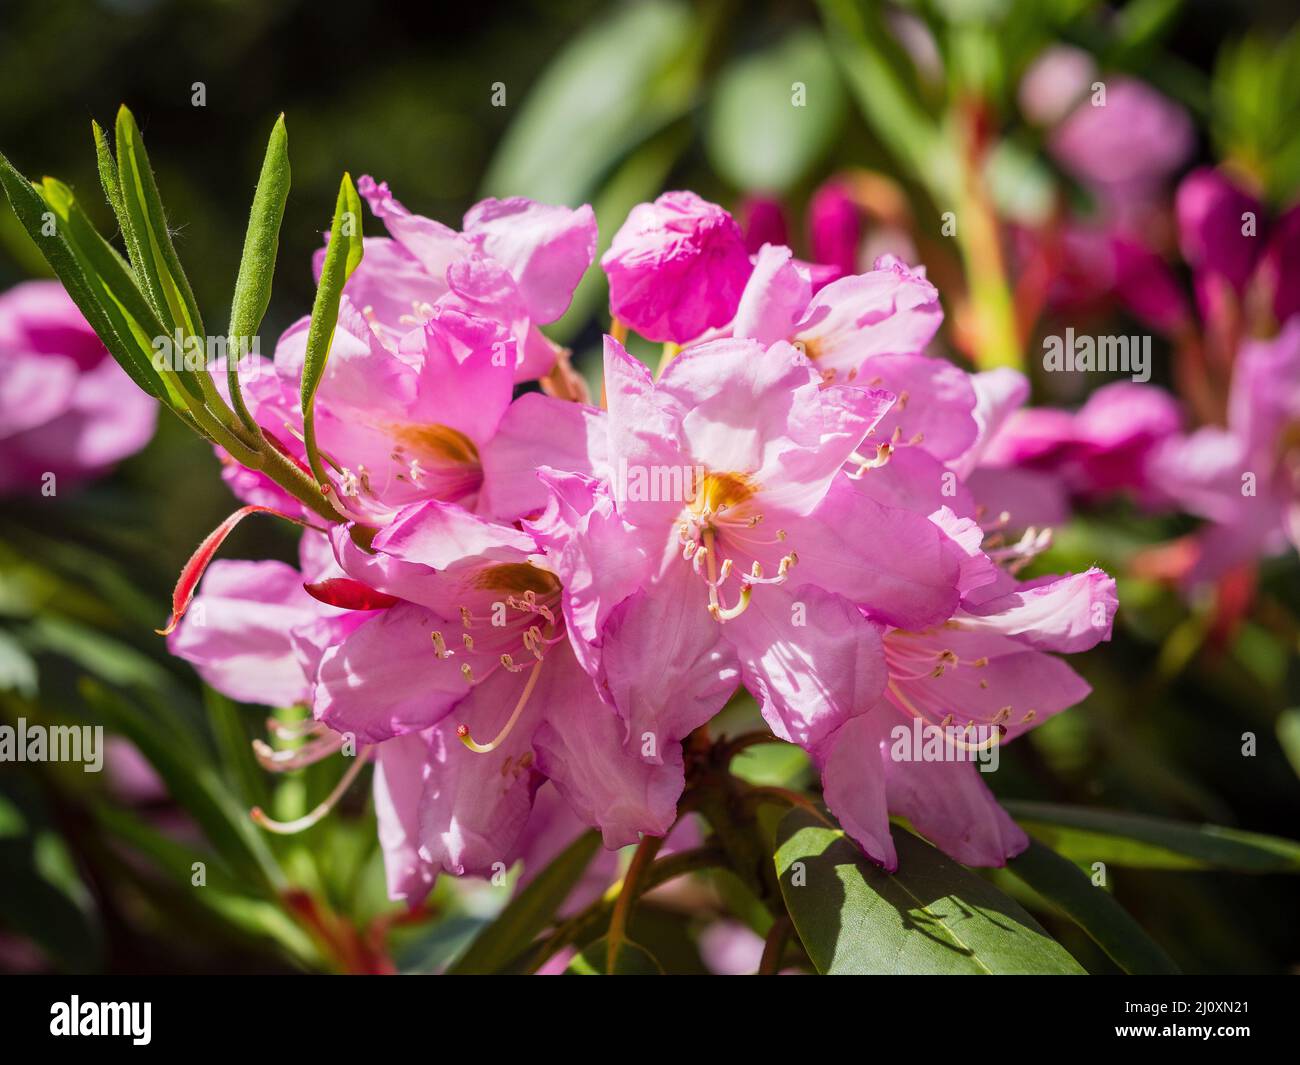 Purple flowers of rhododendron outdoors in the Park on a Sunny day on dark toning background Stock Photo